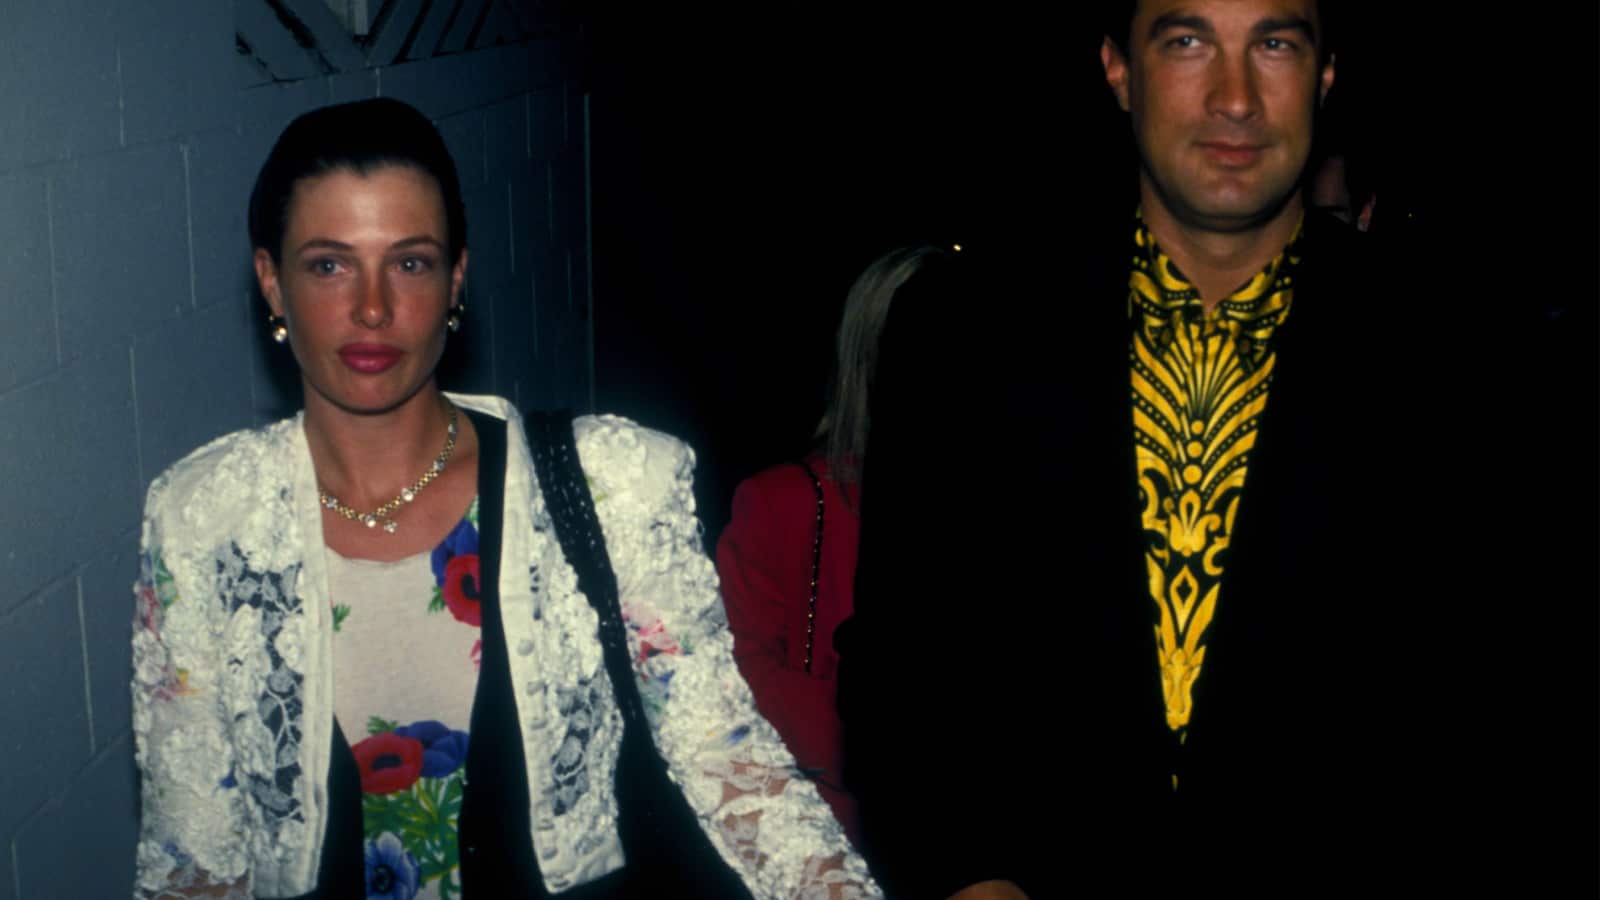 LOS ANGELES - circa 1991: Actor Steven Seagal and his wife Kelly LeBrock leave Spago restaurant.